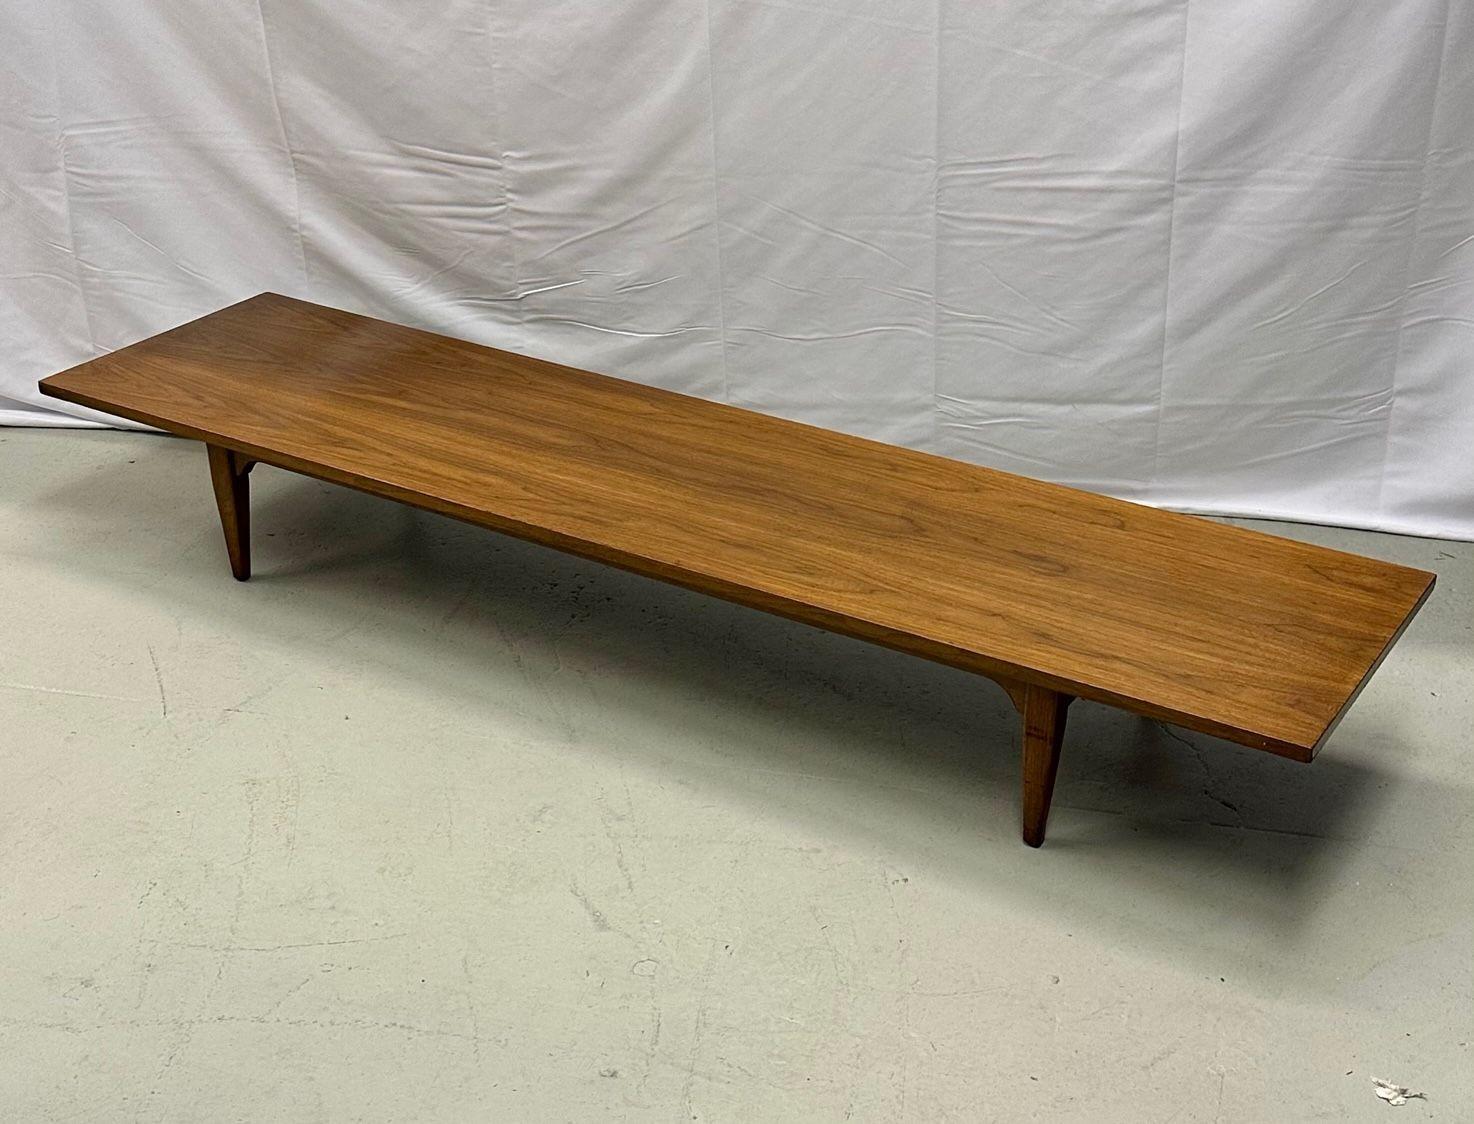 Danish Mid-Century Modern solid teak narrow low / coffee table, 1950s.
A six foot long and narrow Mid-Century Modern coffee table having a solid teak top and base sitting on 4 recessed legs. Designed by and unknown Danish designer. 
Measures: 10 H